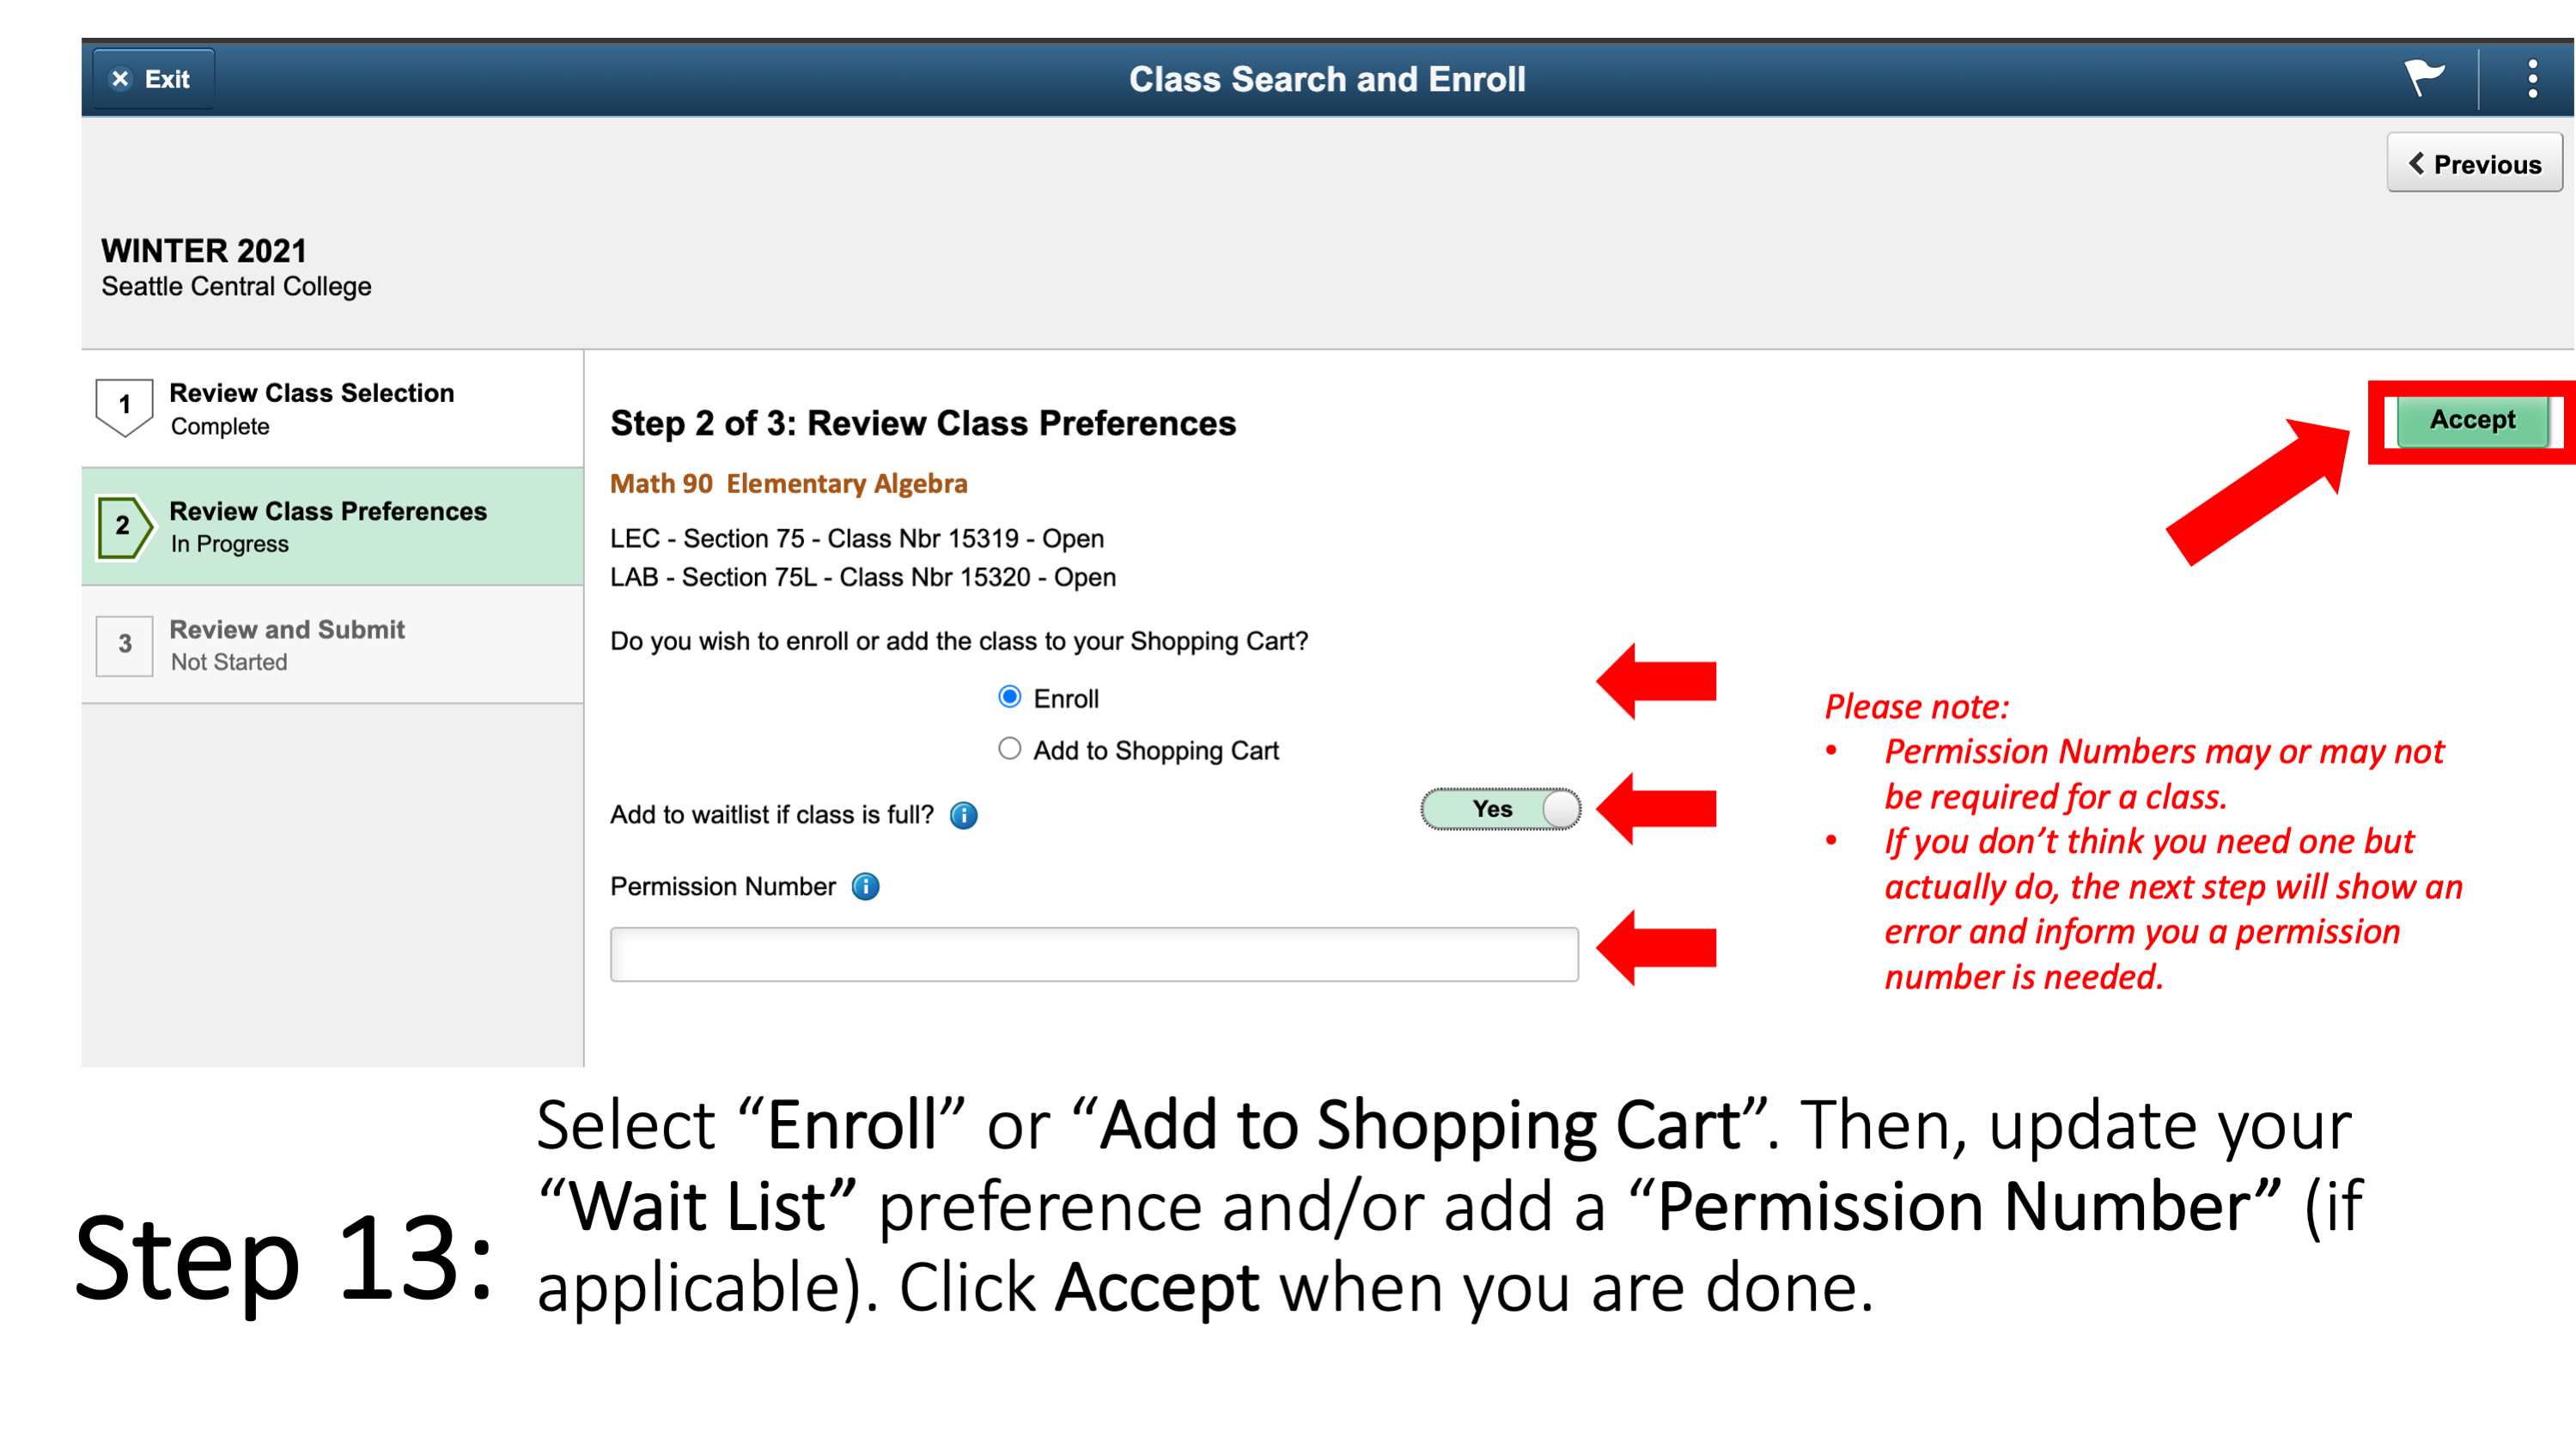 Step 13: Select “Enroll” or “Add to Shopping Cart”. Then, update your “Wait List” preference and/or add a “Permission Number” (if applicable). Click Accept when you are done. Please note: Permission Numbers may or may not be required for a class. If you don’t think you need one but actually do, the next step will show an error and inform you a permission number is needed. 